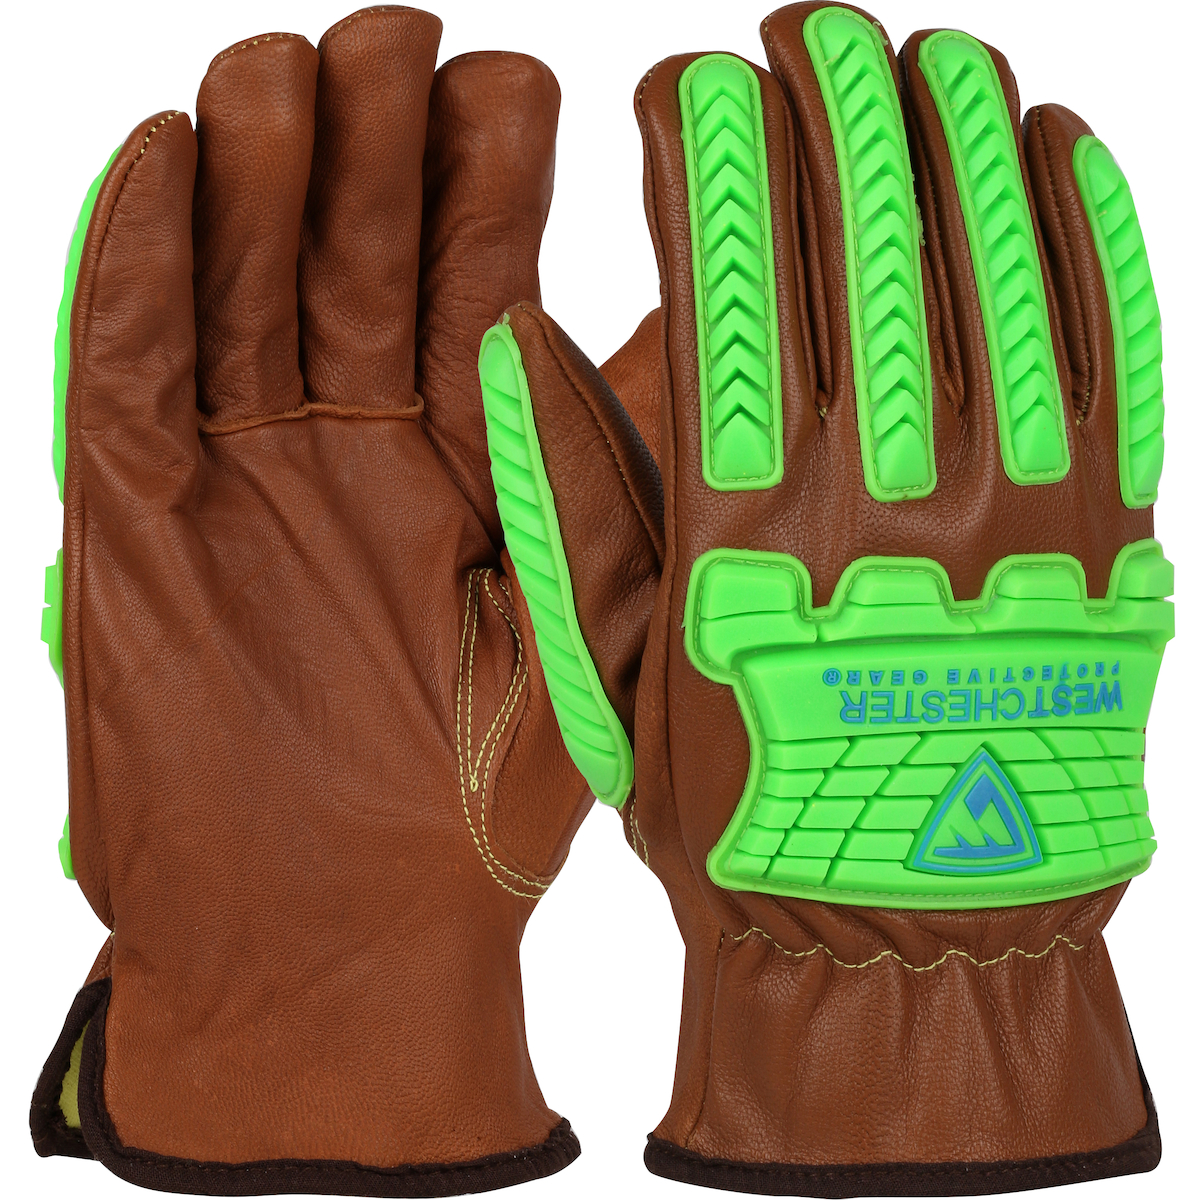 KS993KOAB PIP®West Chester®顶级Grain Goatskin Impact Leather Drivers Glove with Para-Aramid Lining and Keystone Thumb feature Oil Armor™